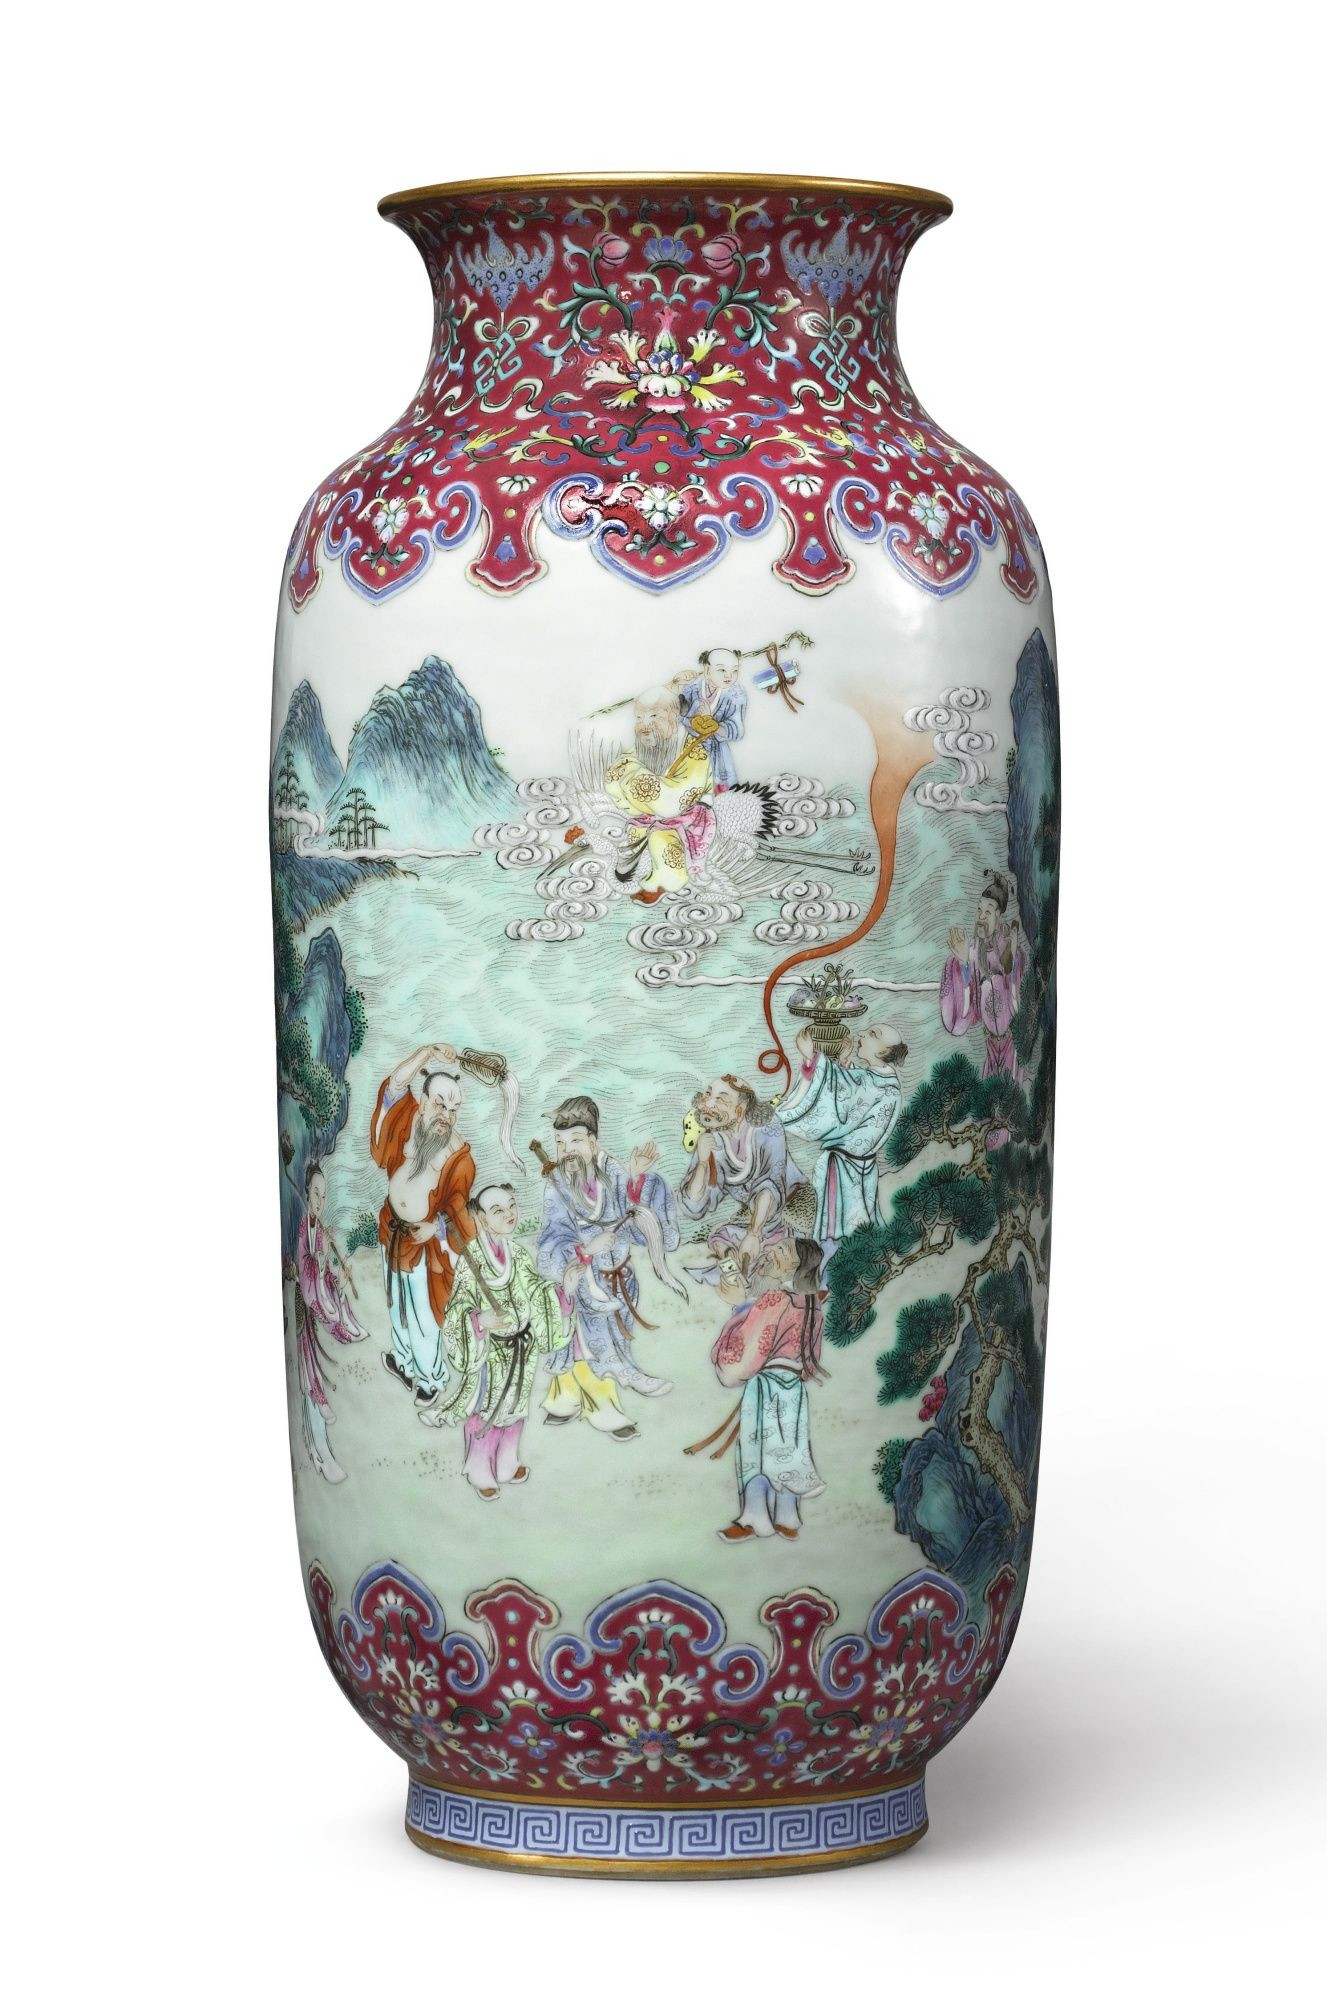 30 Fashionable Qianlong Vase Value 2024 free download qianlong vase value of large ruby ground famille rose eight daoist immortals vase with large ruby ground famille rose eight daoist immortals vase qianlong mark and period exceptional for its